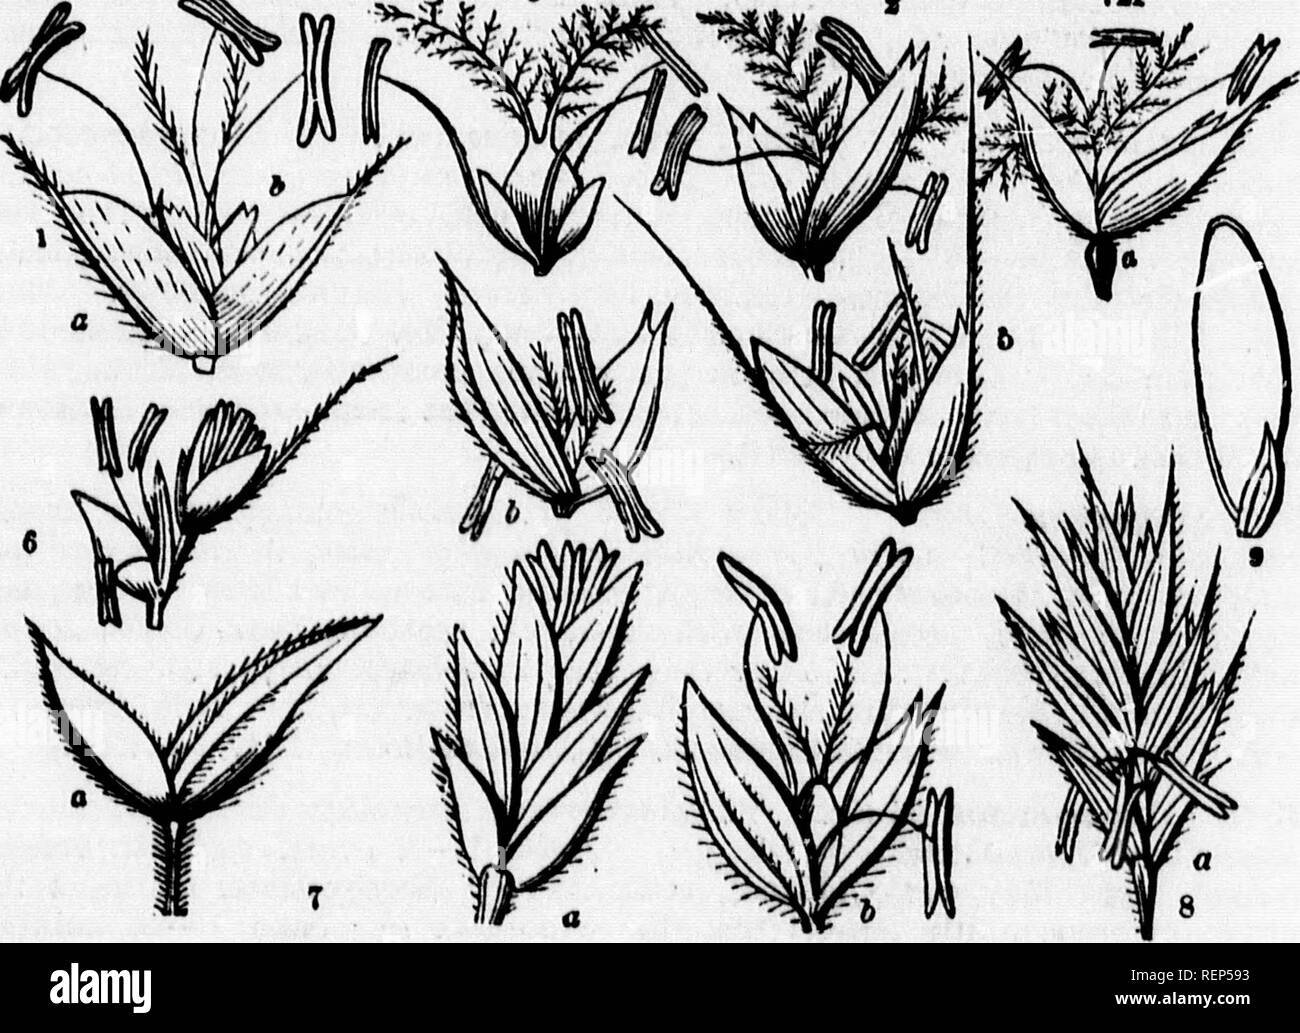 . Class-book of botany [microform] : being outlines of the structure, physiology, and classification of plants : with a flora of the United States and Canada. Botany; Botany; Plants; Plants; Botanique; Botanique; Plantes; Botanique. :70 Obdkh 156.âGRAMINE^. Order CLVI. GRAMINELE. Grasses. Herhi rarely woody or arboroscont, with (mostly) hoUow, jointed culms- with fcaves alternate, distychouB, on tubular sheatiia split down to the nodes, and a Ugule (stipules) of membranous toxturo where the leaf joins the sheath. Flowers in littb spikeleLs of 1 or several, with glumes distychously arranged, an Stock Photo